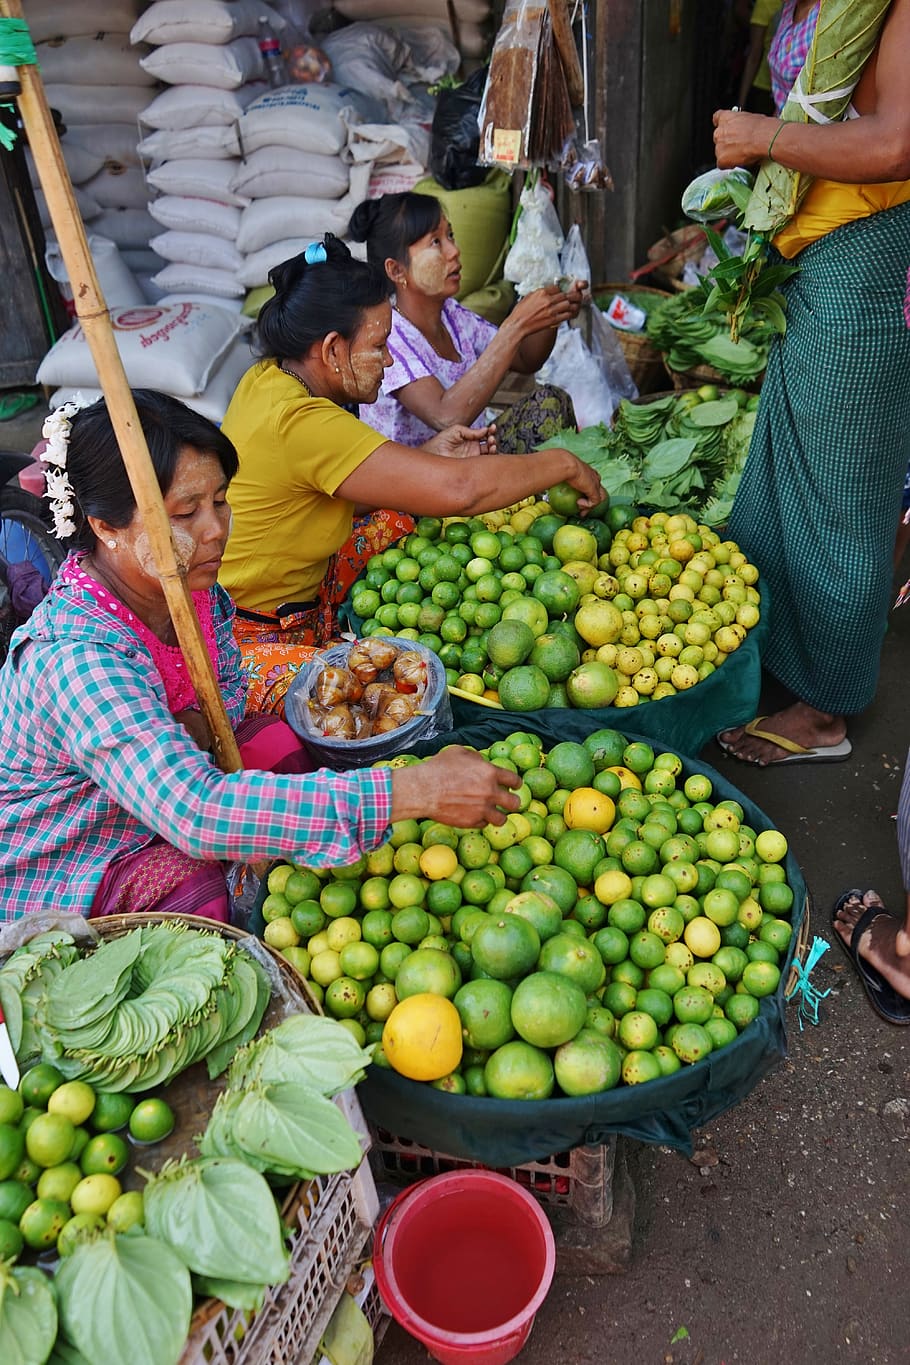 myanmar, asia, burma, local, market, fruit, people, traditional, culture, agriculture